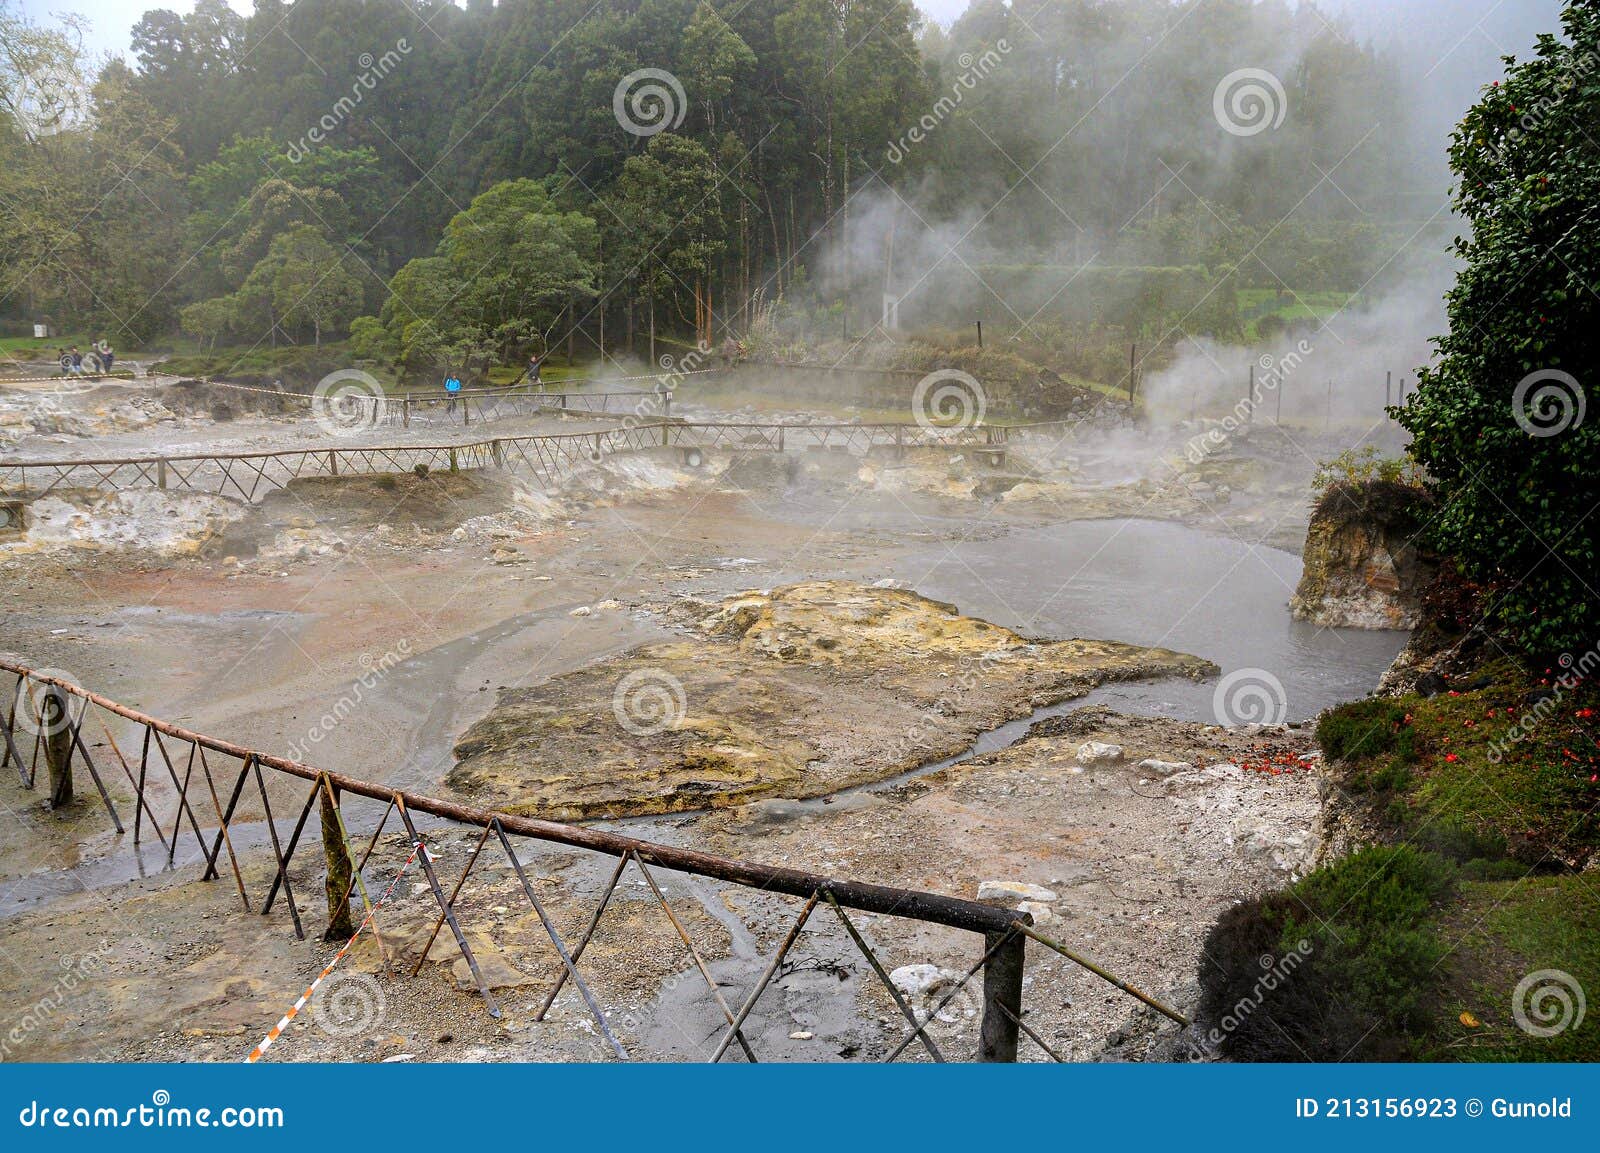 volcanic steam of sulfur at the caldeiras of furnas